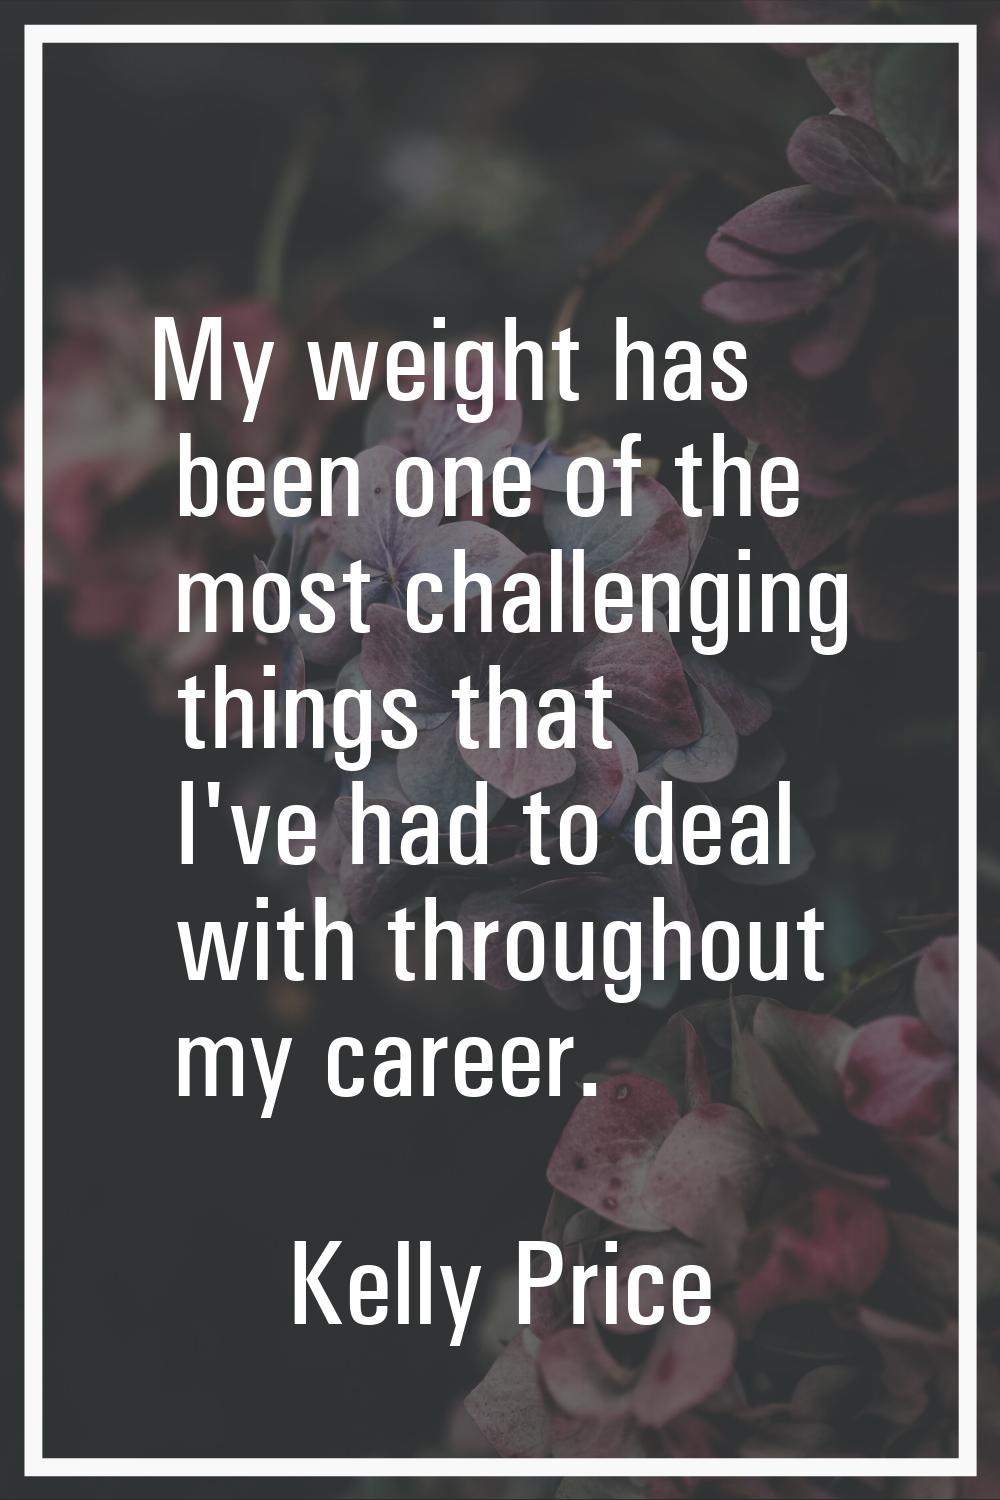 My weight has been one of the most challenging things that I've had to deal with throughout my care